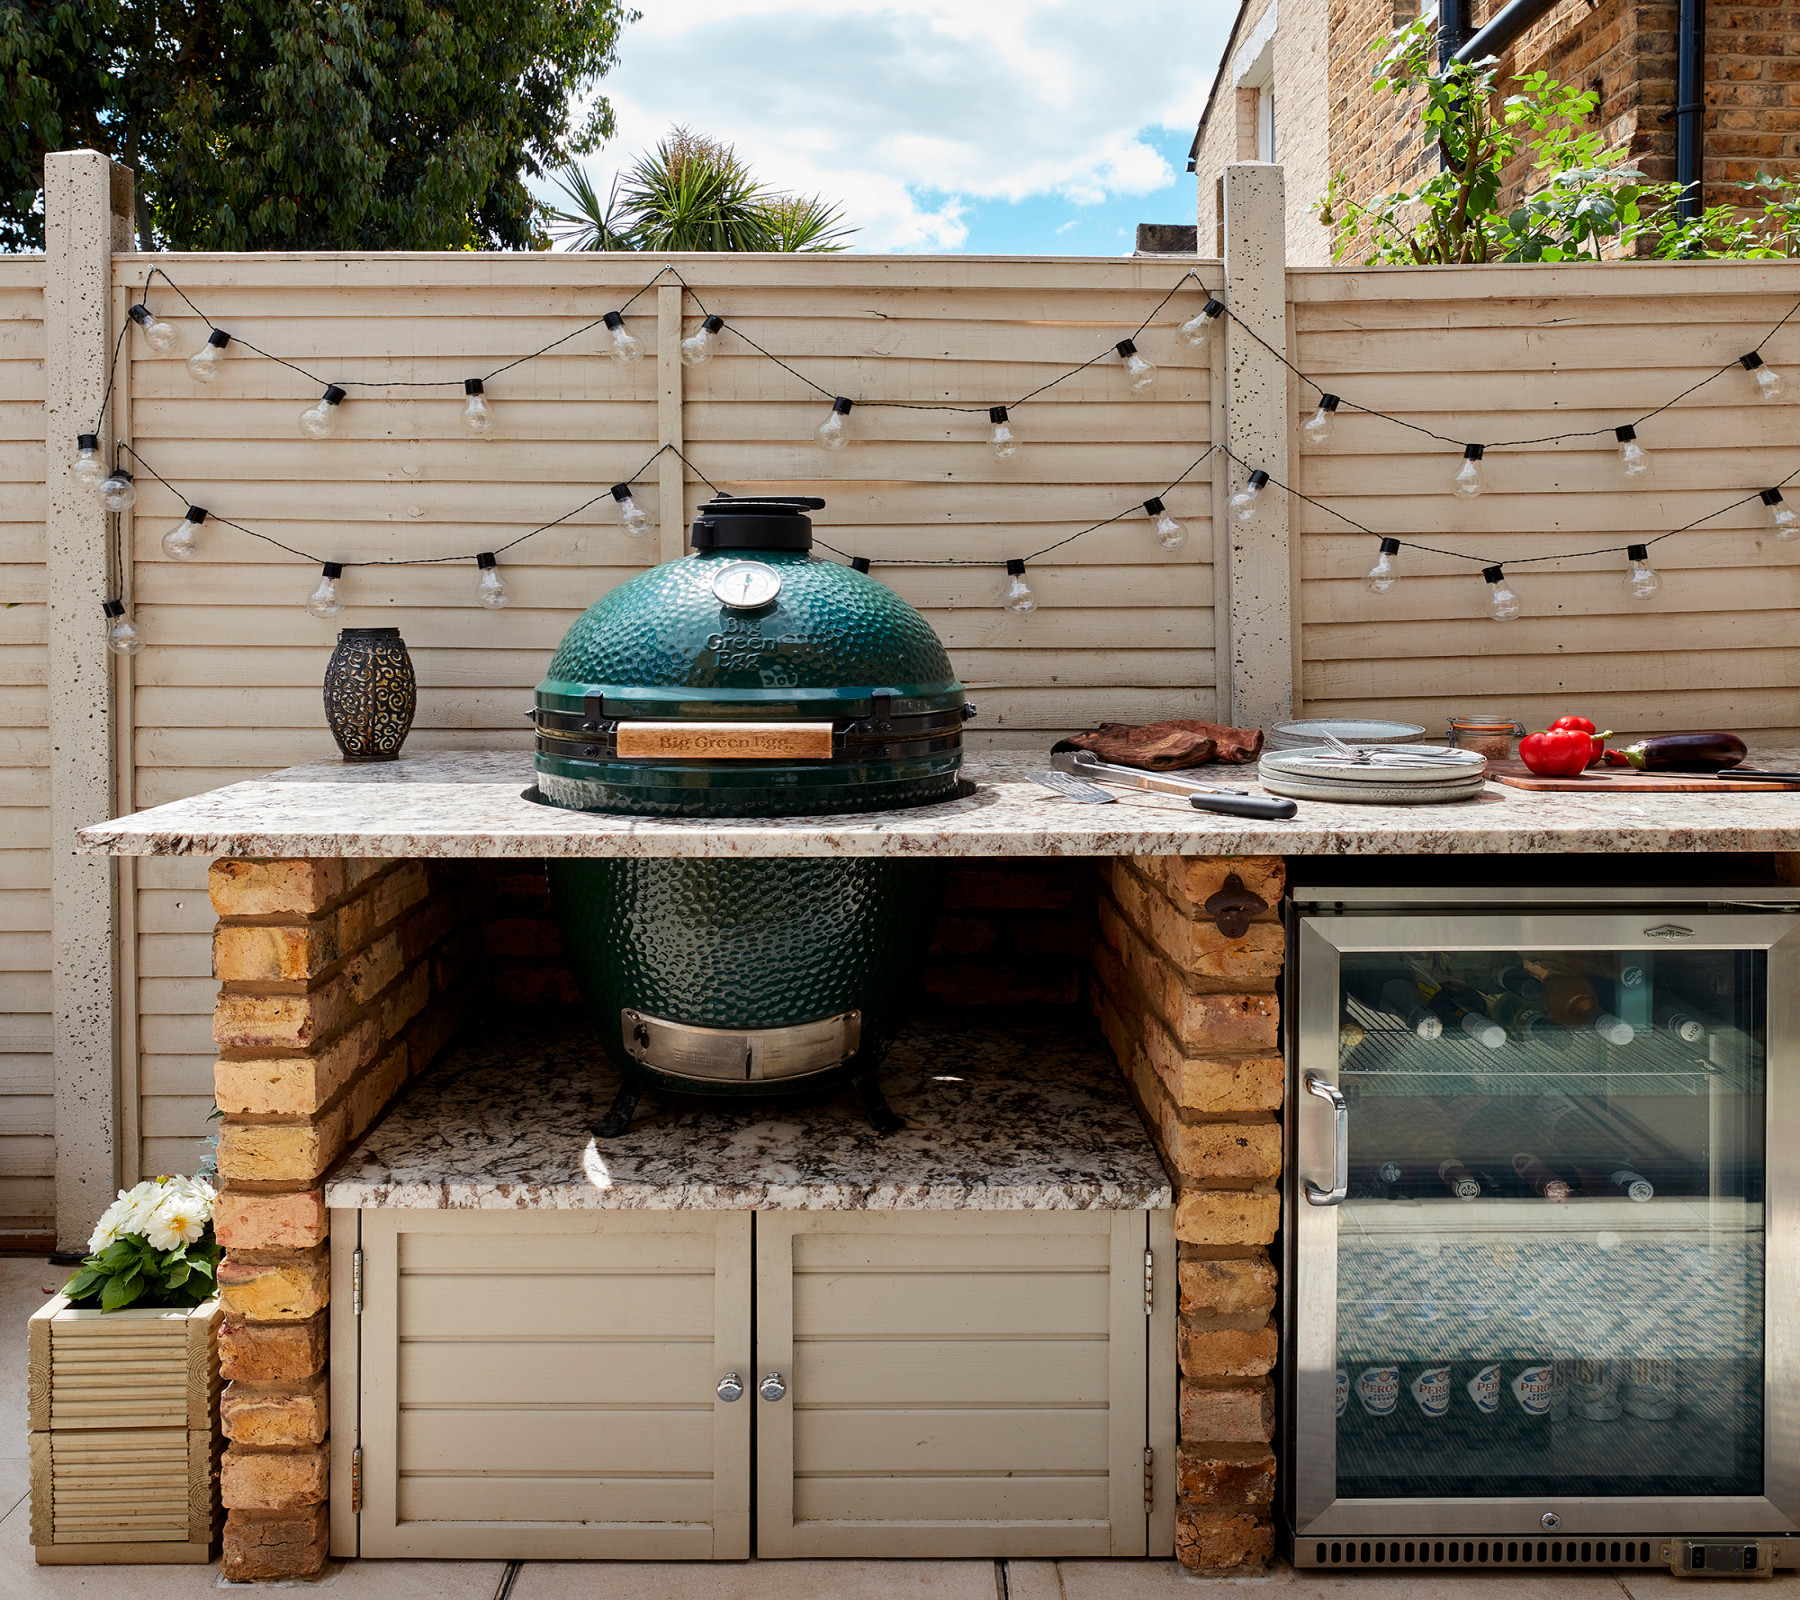 How to build an outdoor kitchen for a special alfresco experience